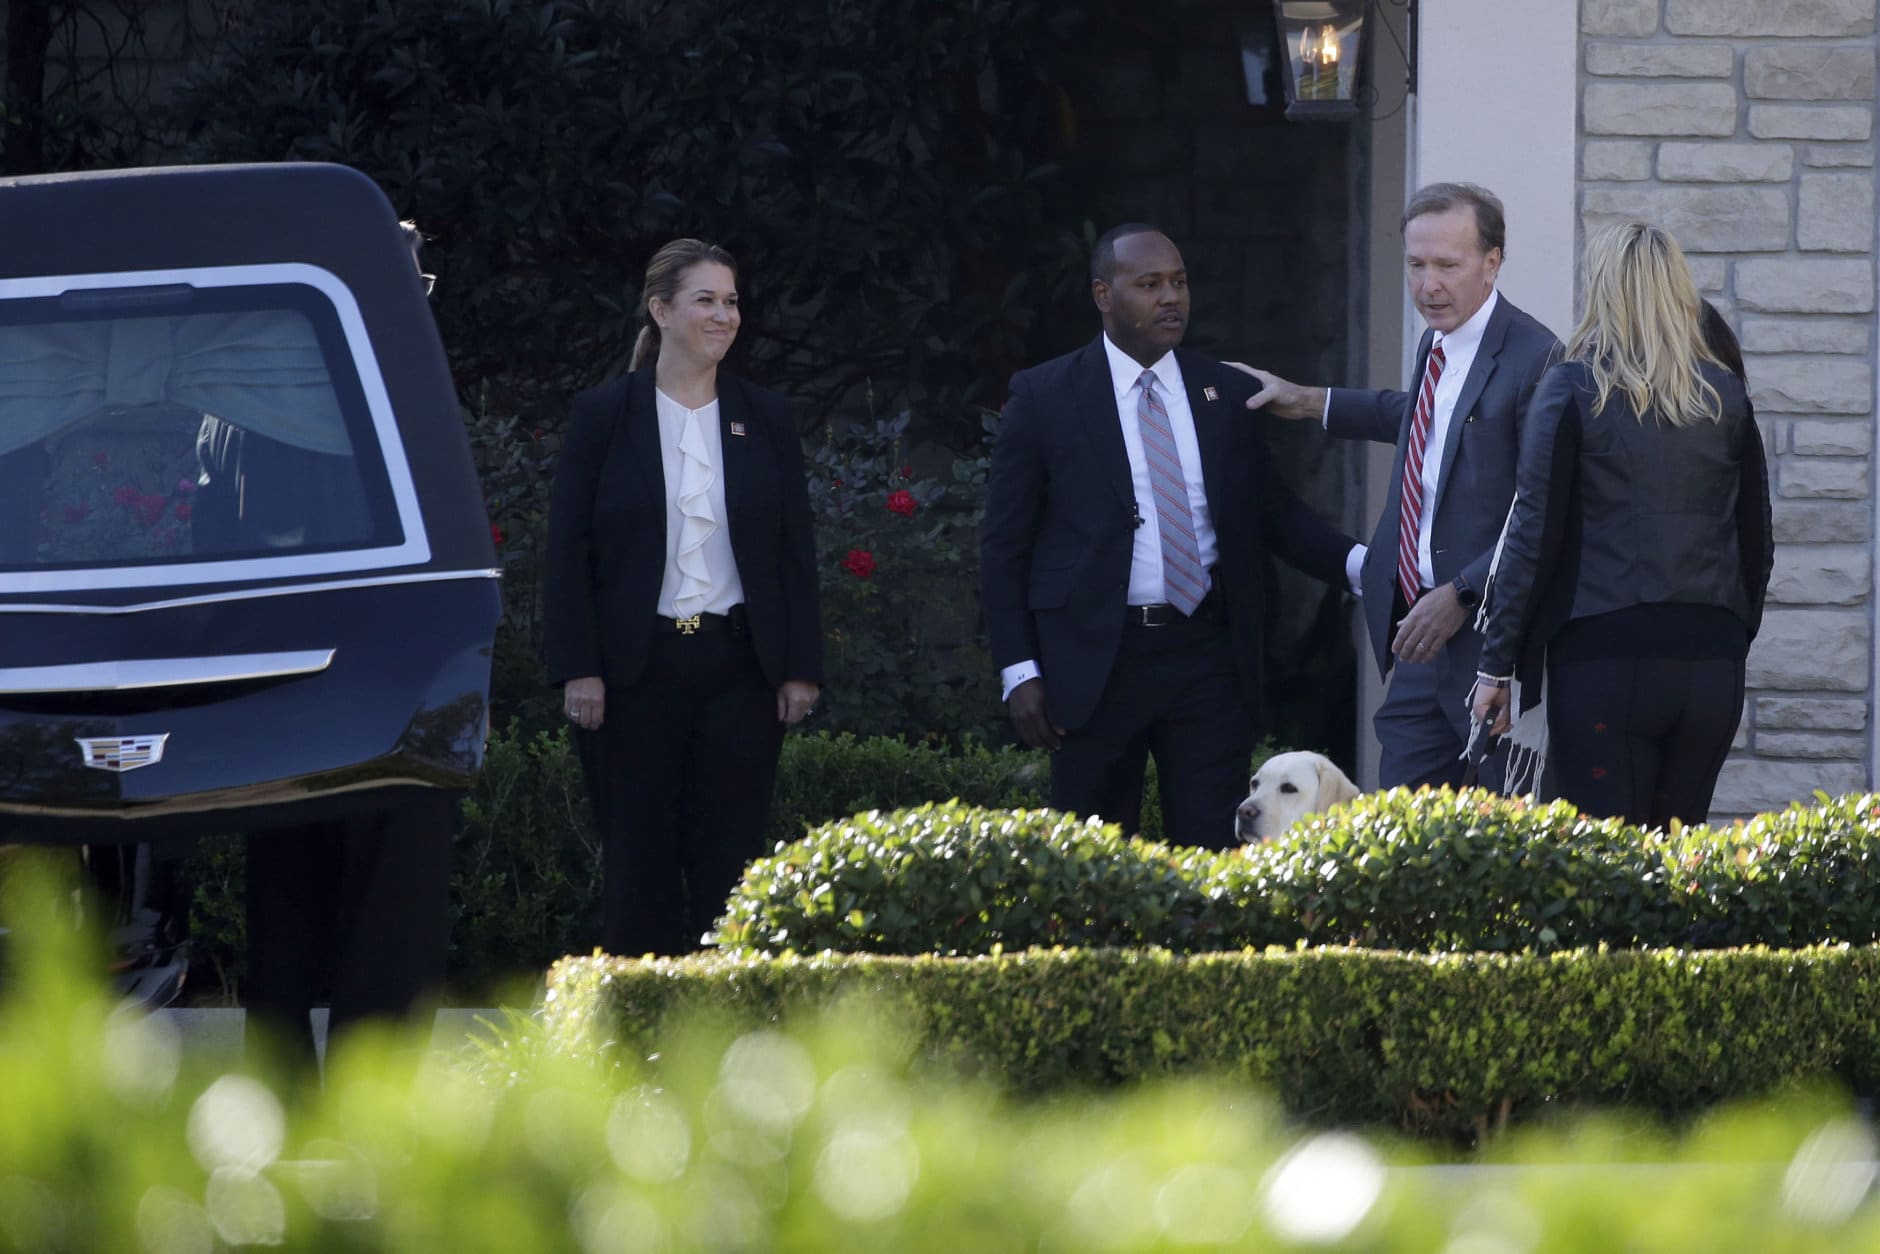 Neil Bush, right, greets members of the U.S. Secret Service after the casket of former President George H. W. Bush was placed into a hearse at the George H. Lewis Funeral Home following a family service, Monday, Dec. 3, 2018, in Houston.  (AP Photo/Kiichiro Sato)